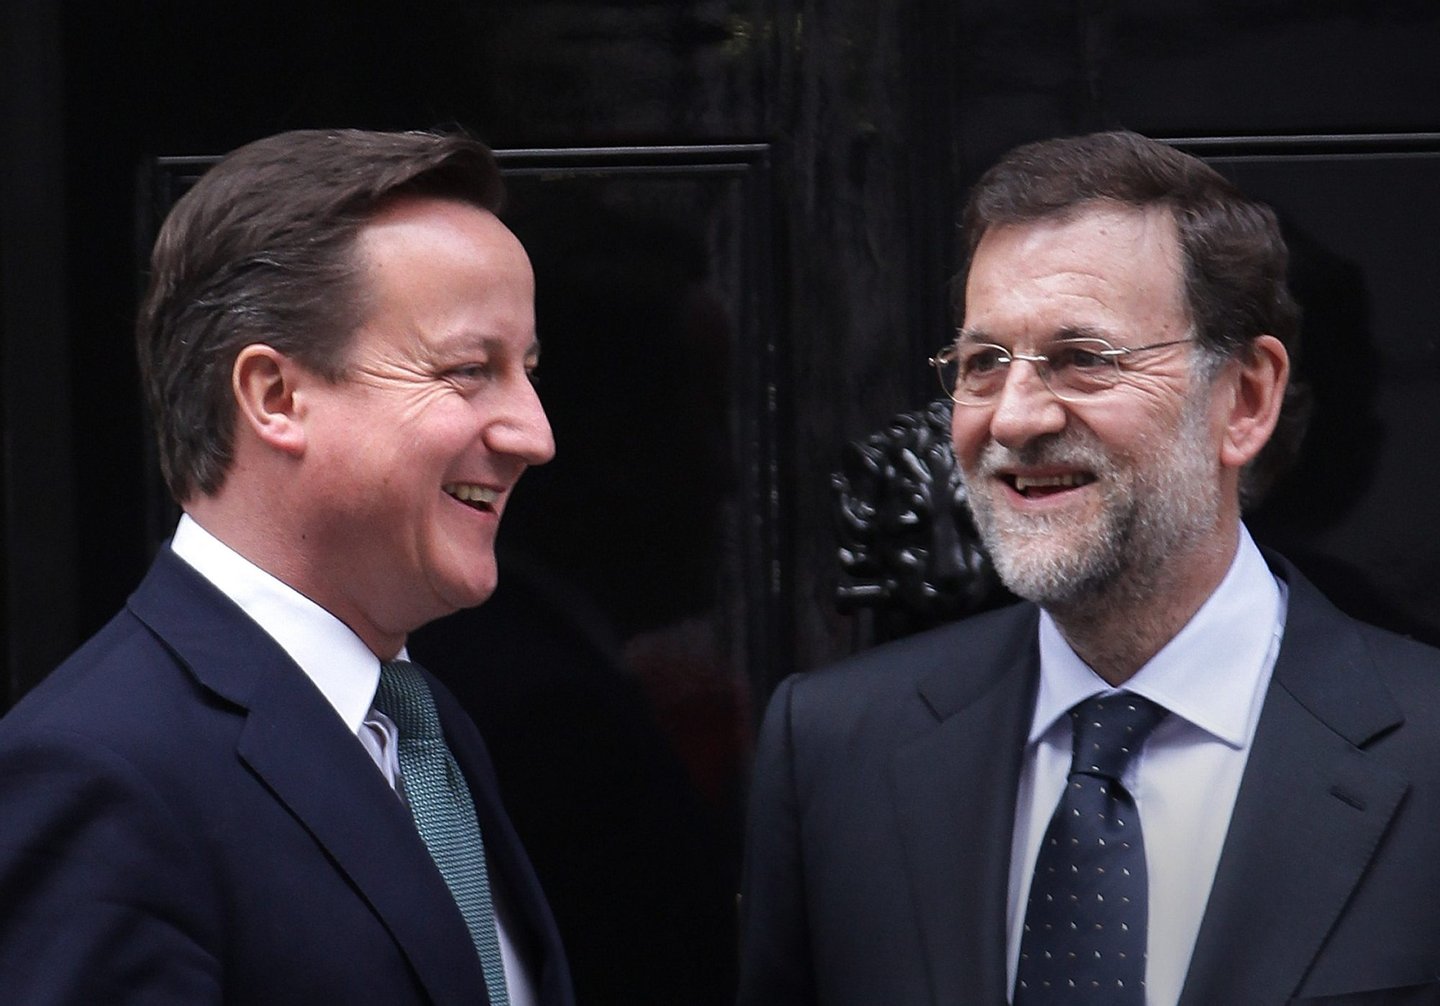 LONDON, ENGLAND - FEBRUARY 21: Prime Minister David Cameron (L) meets with Spanish Prime Minister Mariano Rajoy at 10 Downing Street on February 21, 2012 in London, England. Mr Rajoy is expected to raise the issue of Gibraltar with Mr Cameron. (Photo by Peter Macdiarmid/Getty Images)